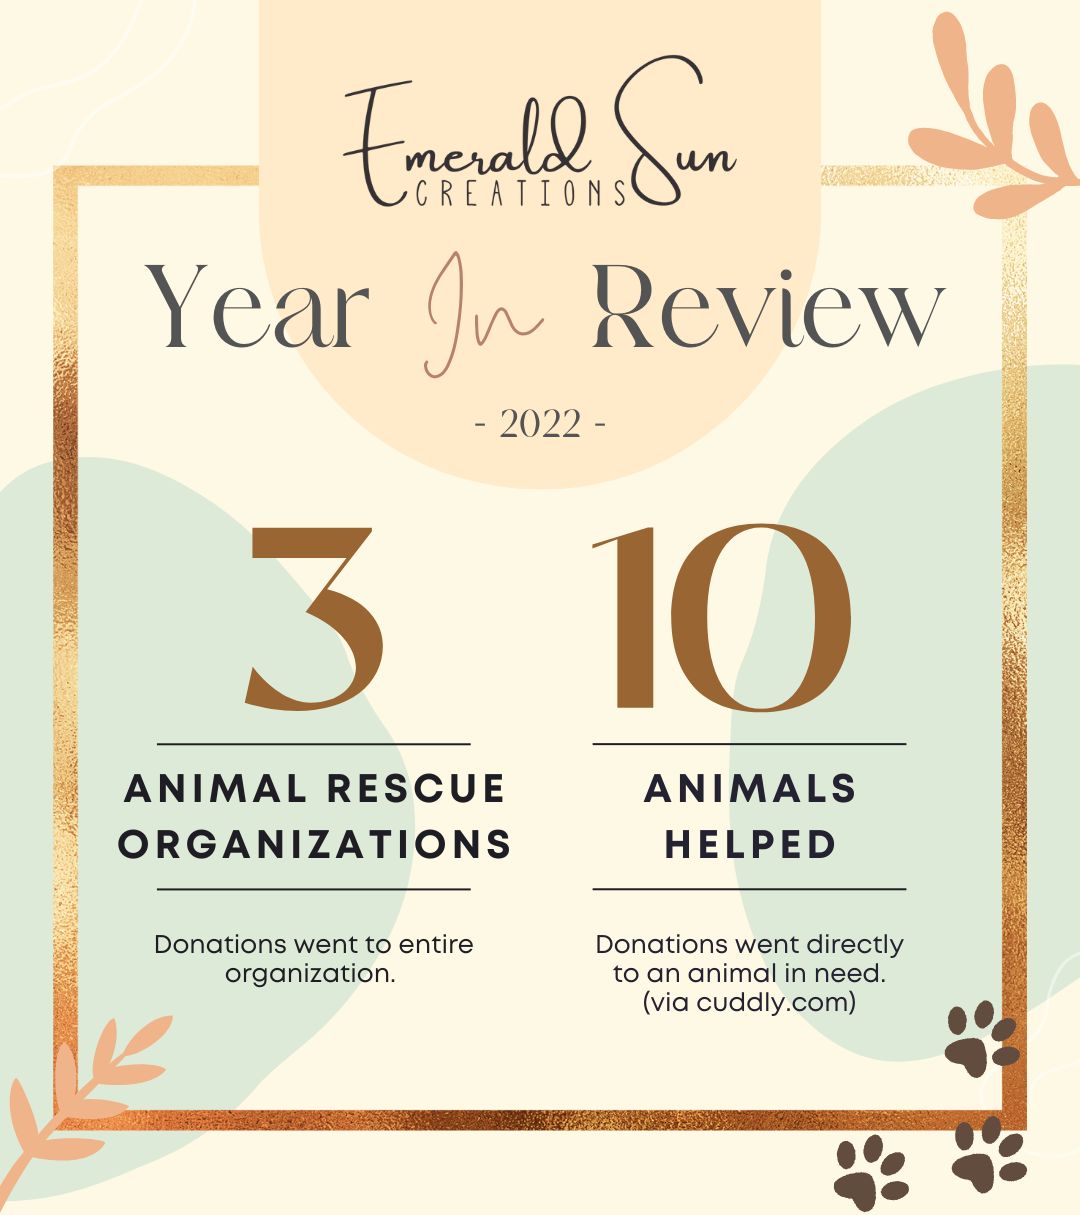 2022 Year in Review - See what our good intentions accomplished this year! Emerald Sun Creations | Natural gemstone jewelry with good intentions. 